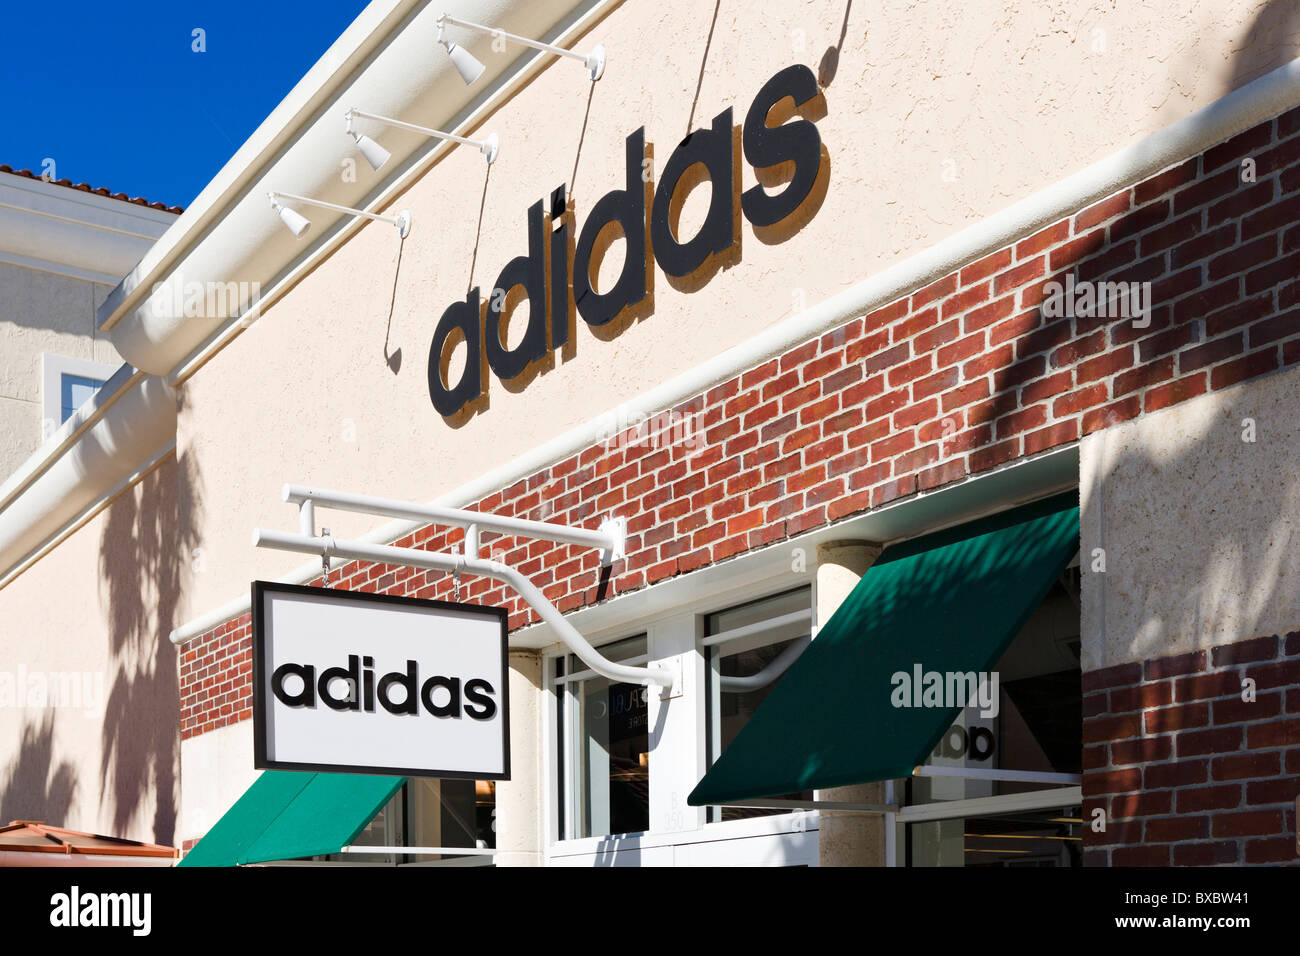 adidas at outlet mall